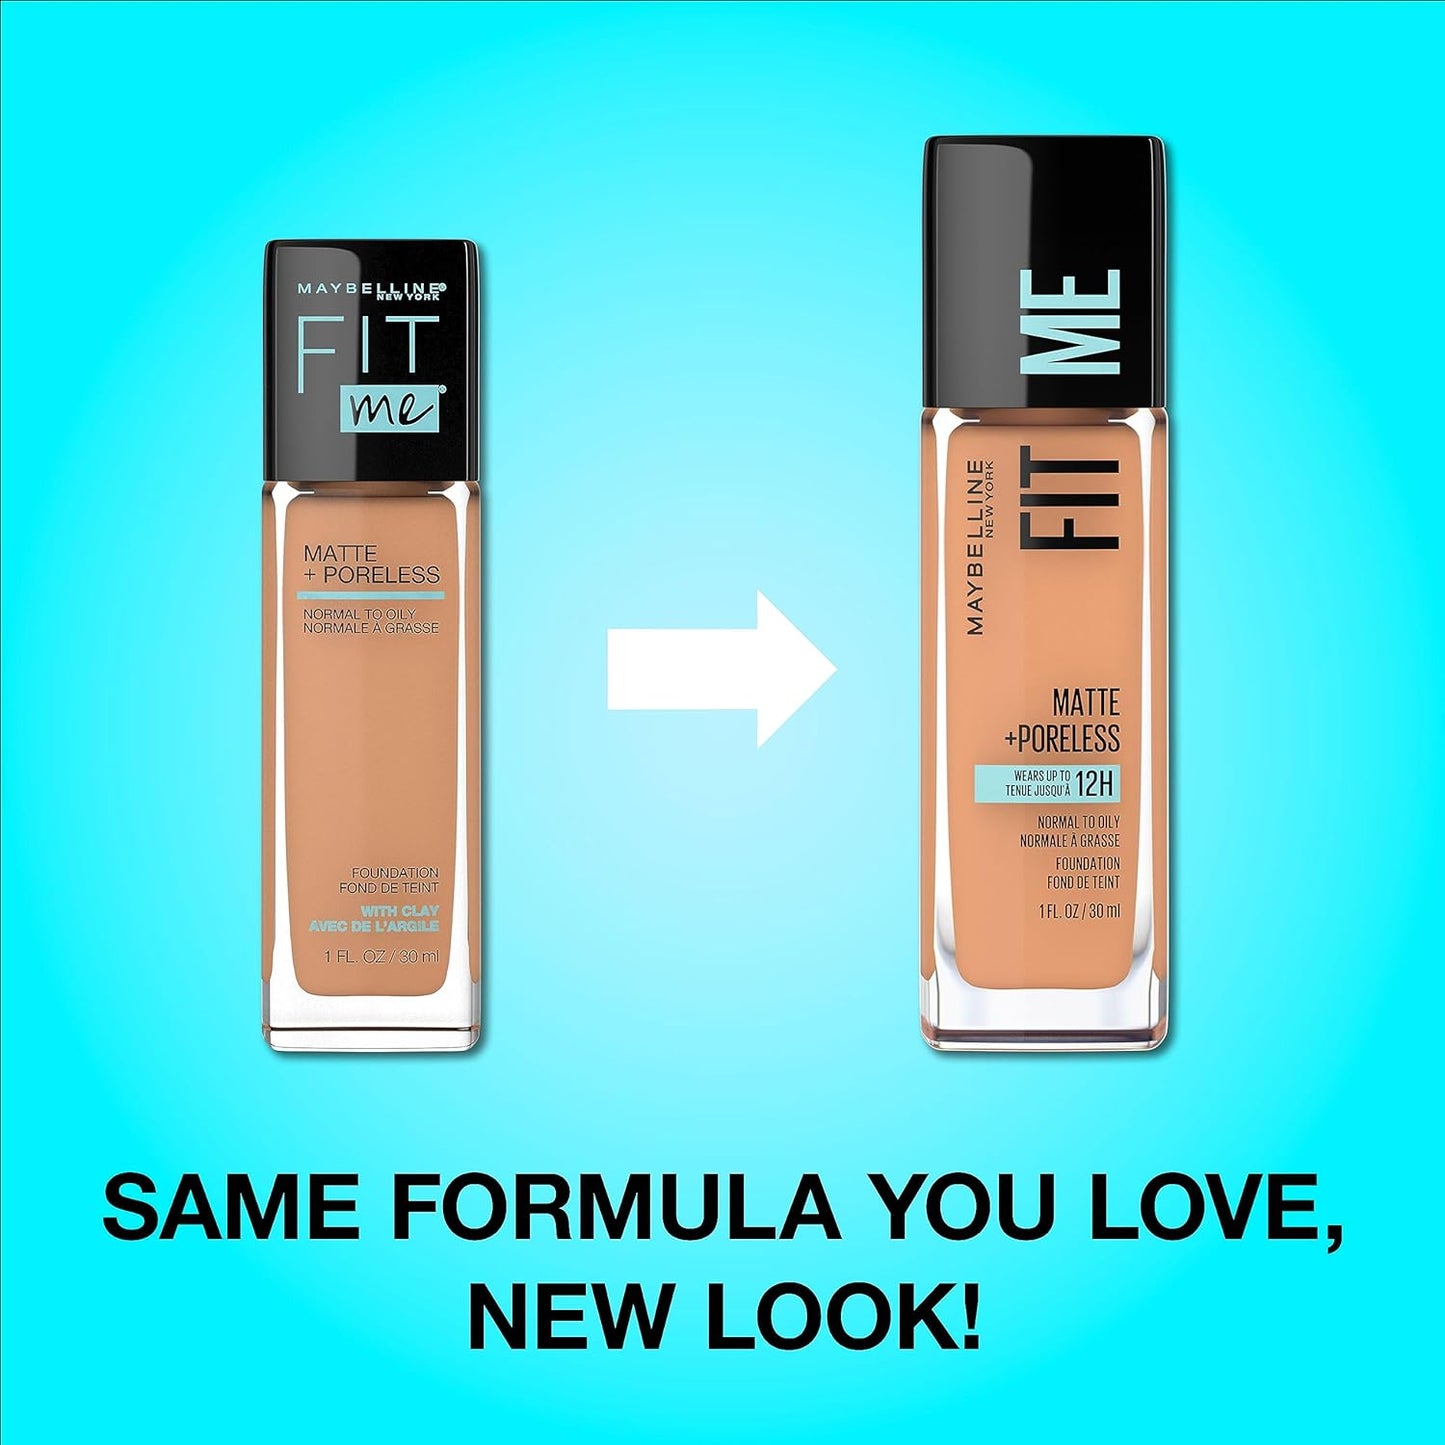 Maybelline Fit Me Matte + Poreless Liquid Oil-Free Foundation Makeup, Golden Caramel, 1 Count (Packaging May Vary)